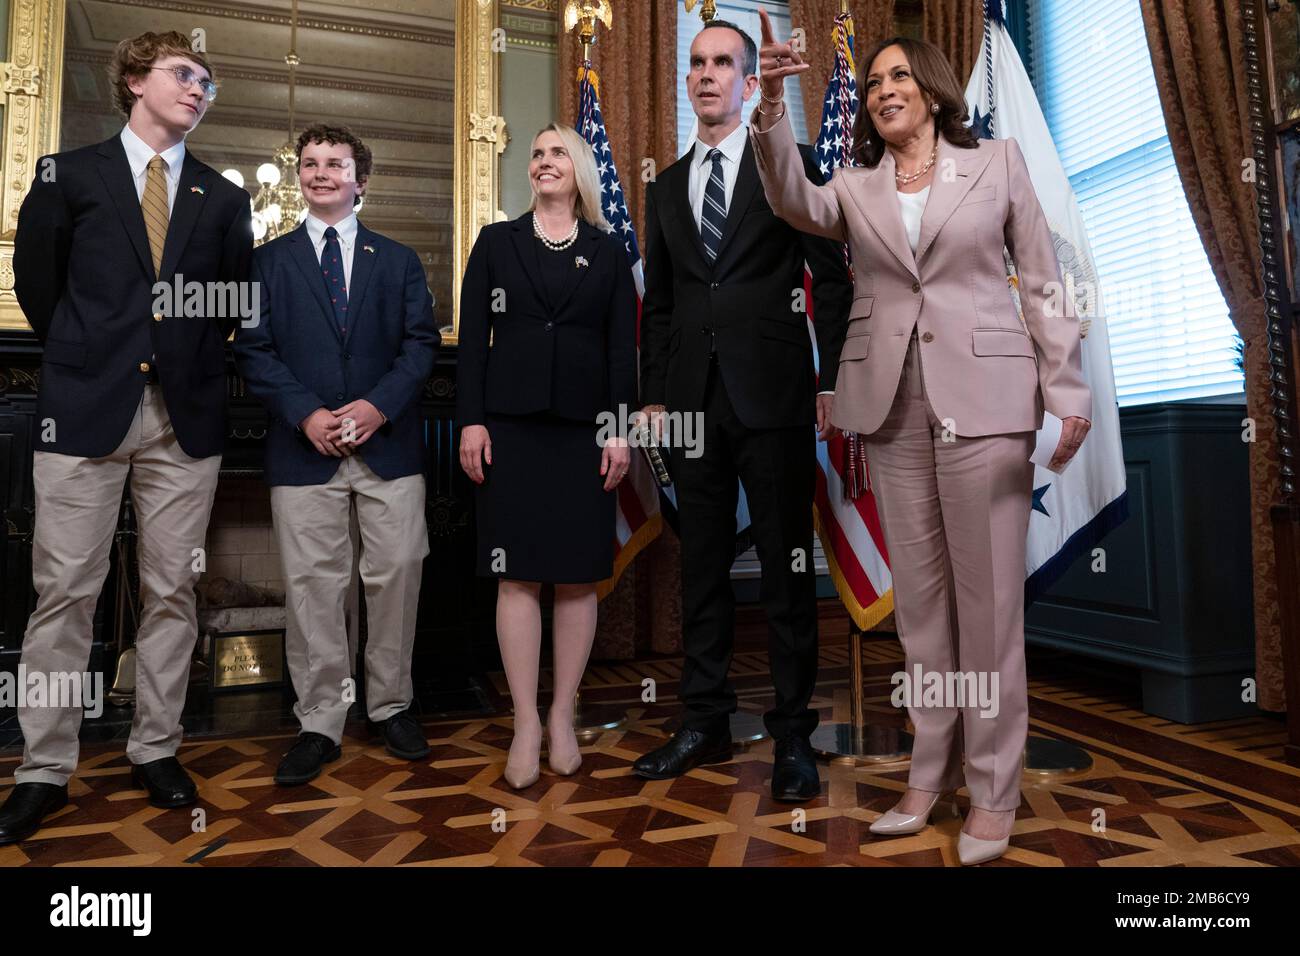 Vice President Kamala Harris, right, takes a photograph with Ambassador Bridget Brink and her family, from left, sons Jack Higgins, Cole Higgins, Brink, and husband Nicholas Higgins, after Brink was ceremonially sworn in as Ambassador to Ukraine, in the Vice President's Ceremonial office, Monday, June 27, 2022, at the Eisenhower Executive Office Building on the White House complex in Washington. (AP Photo/Jacquelyn Martin) Stock Photo